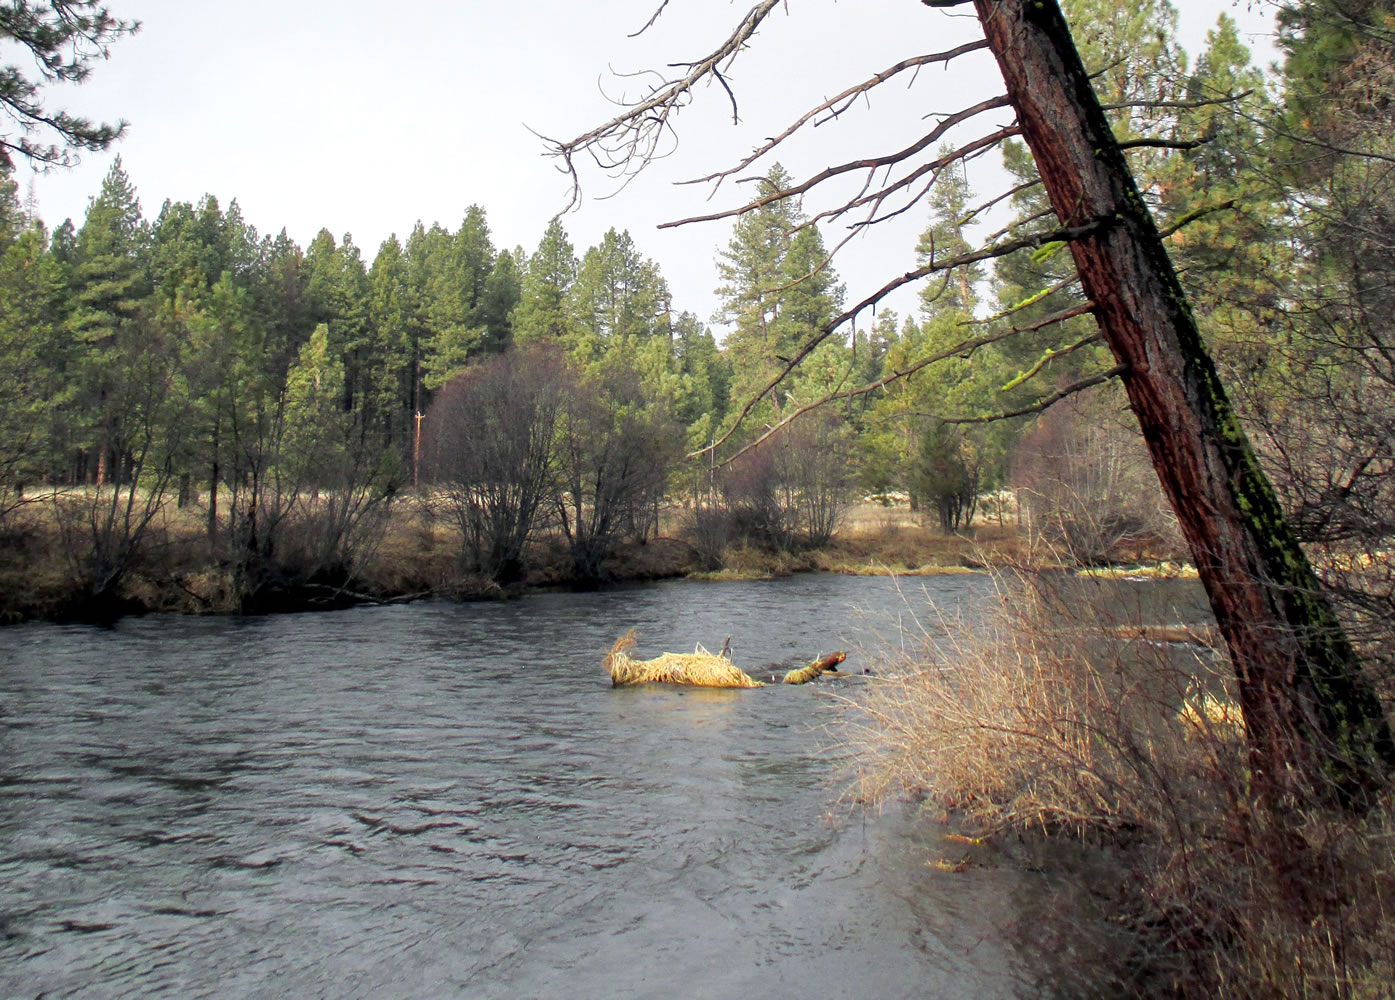 The Metolius River as it flows near Camp Sherman, Ore., earlier this month.